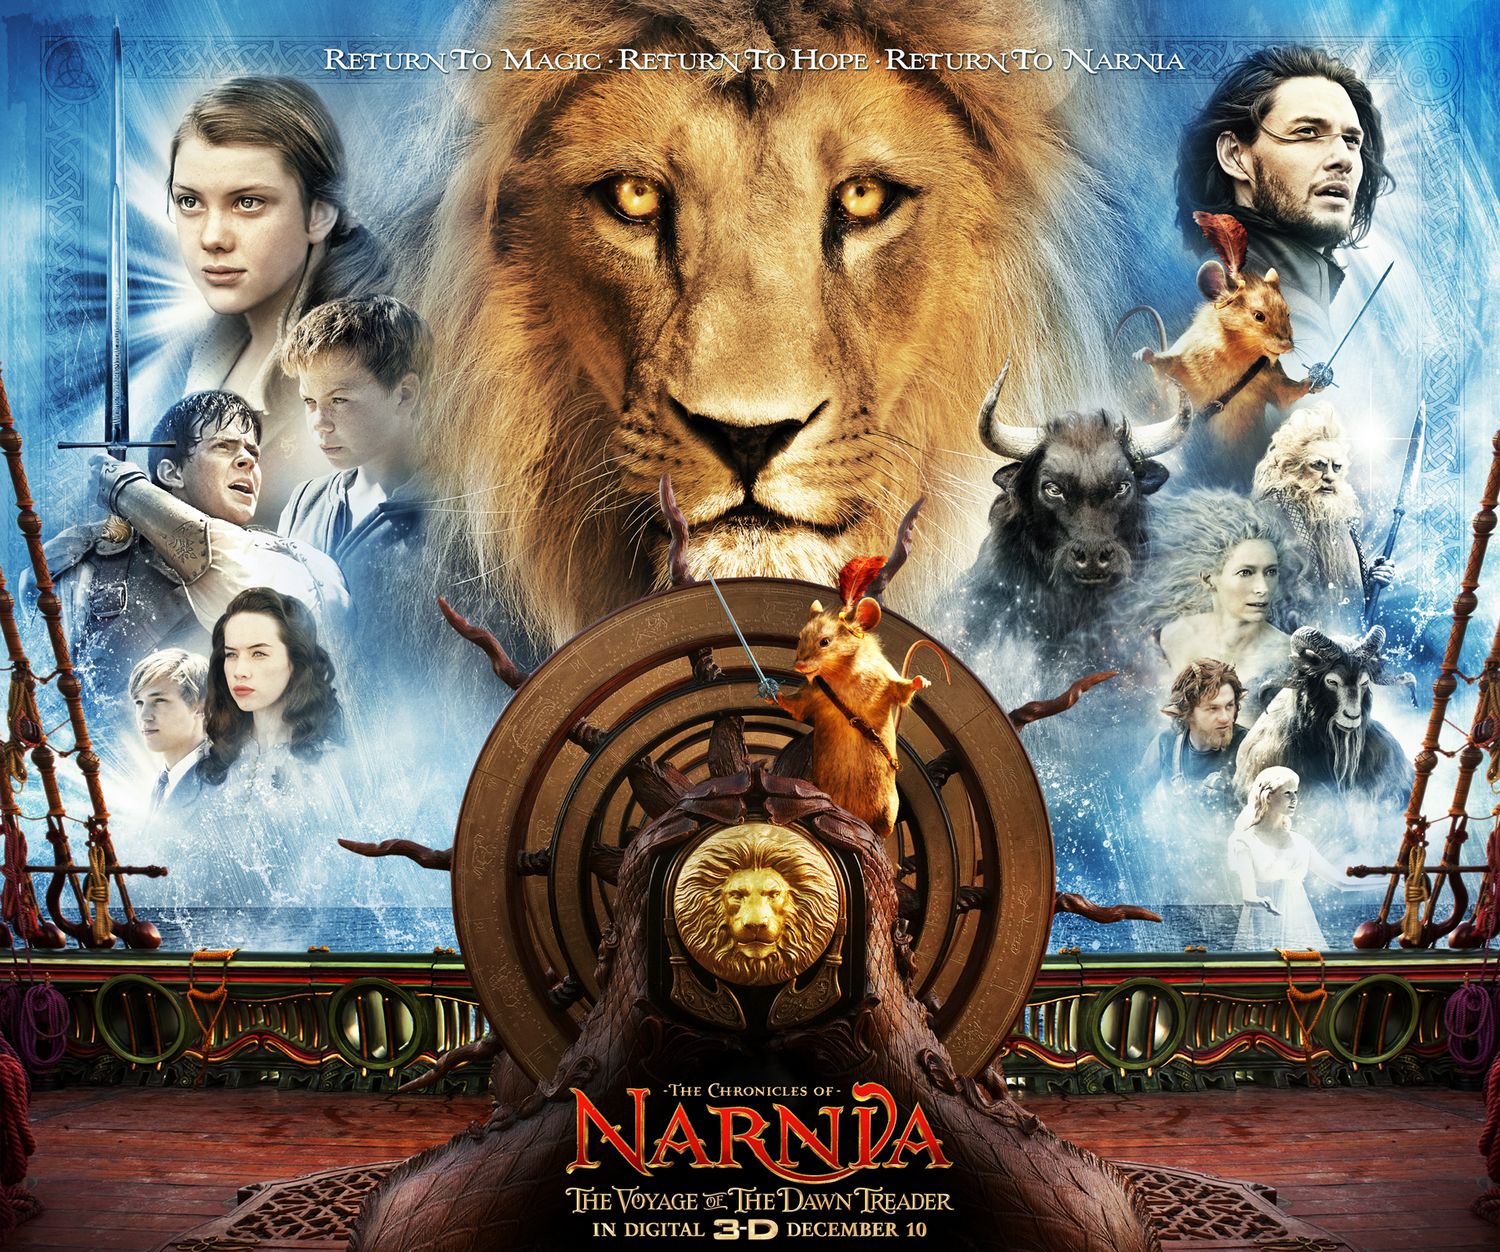 Extra Large Movie Poster Image for The Chronicles of Narnia: The Voyage of the Dawn Treader (#5 of 7)